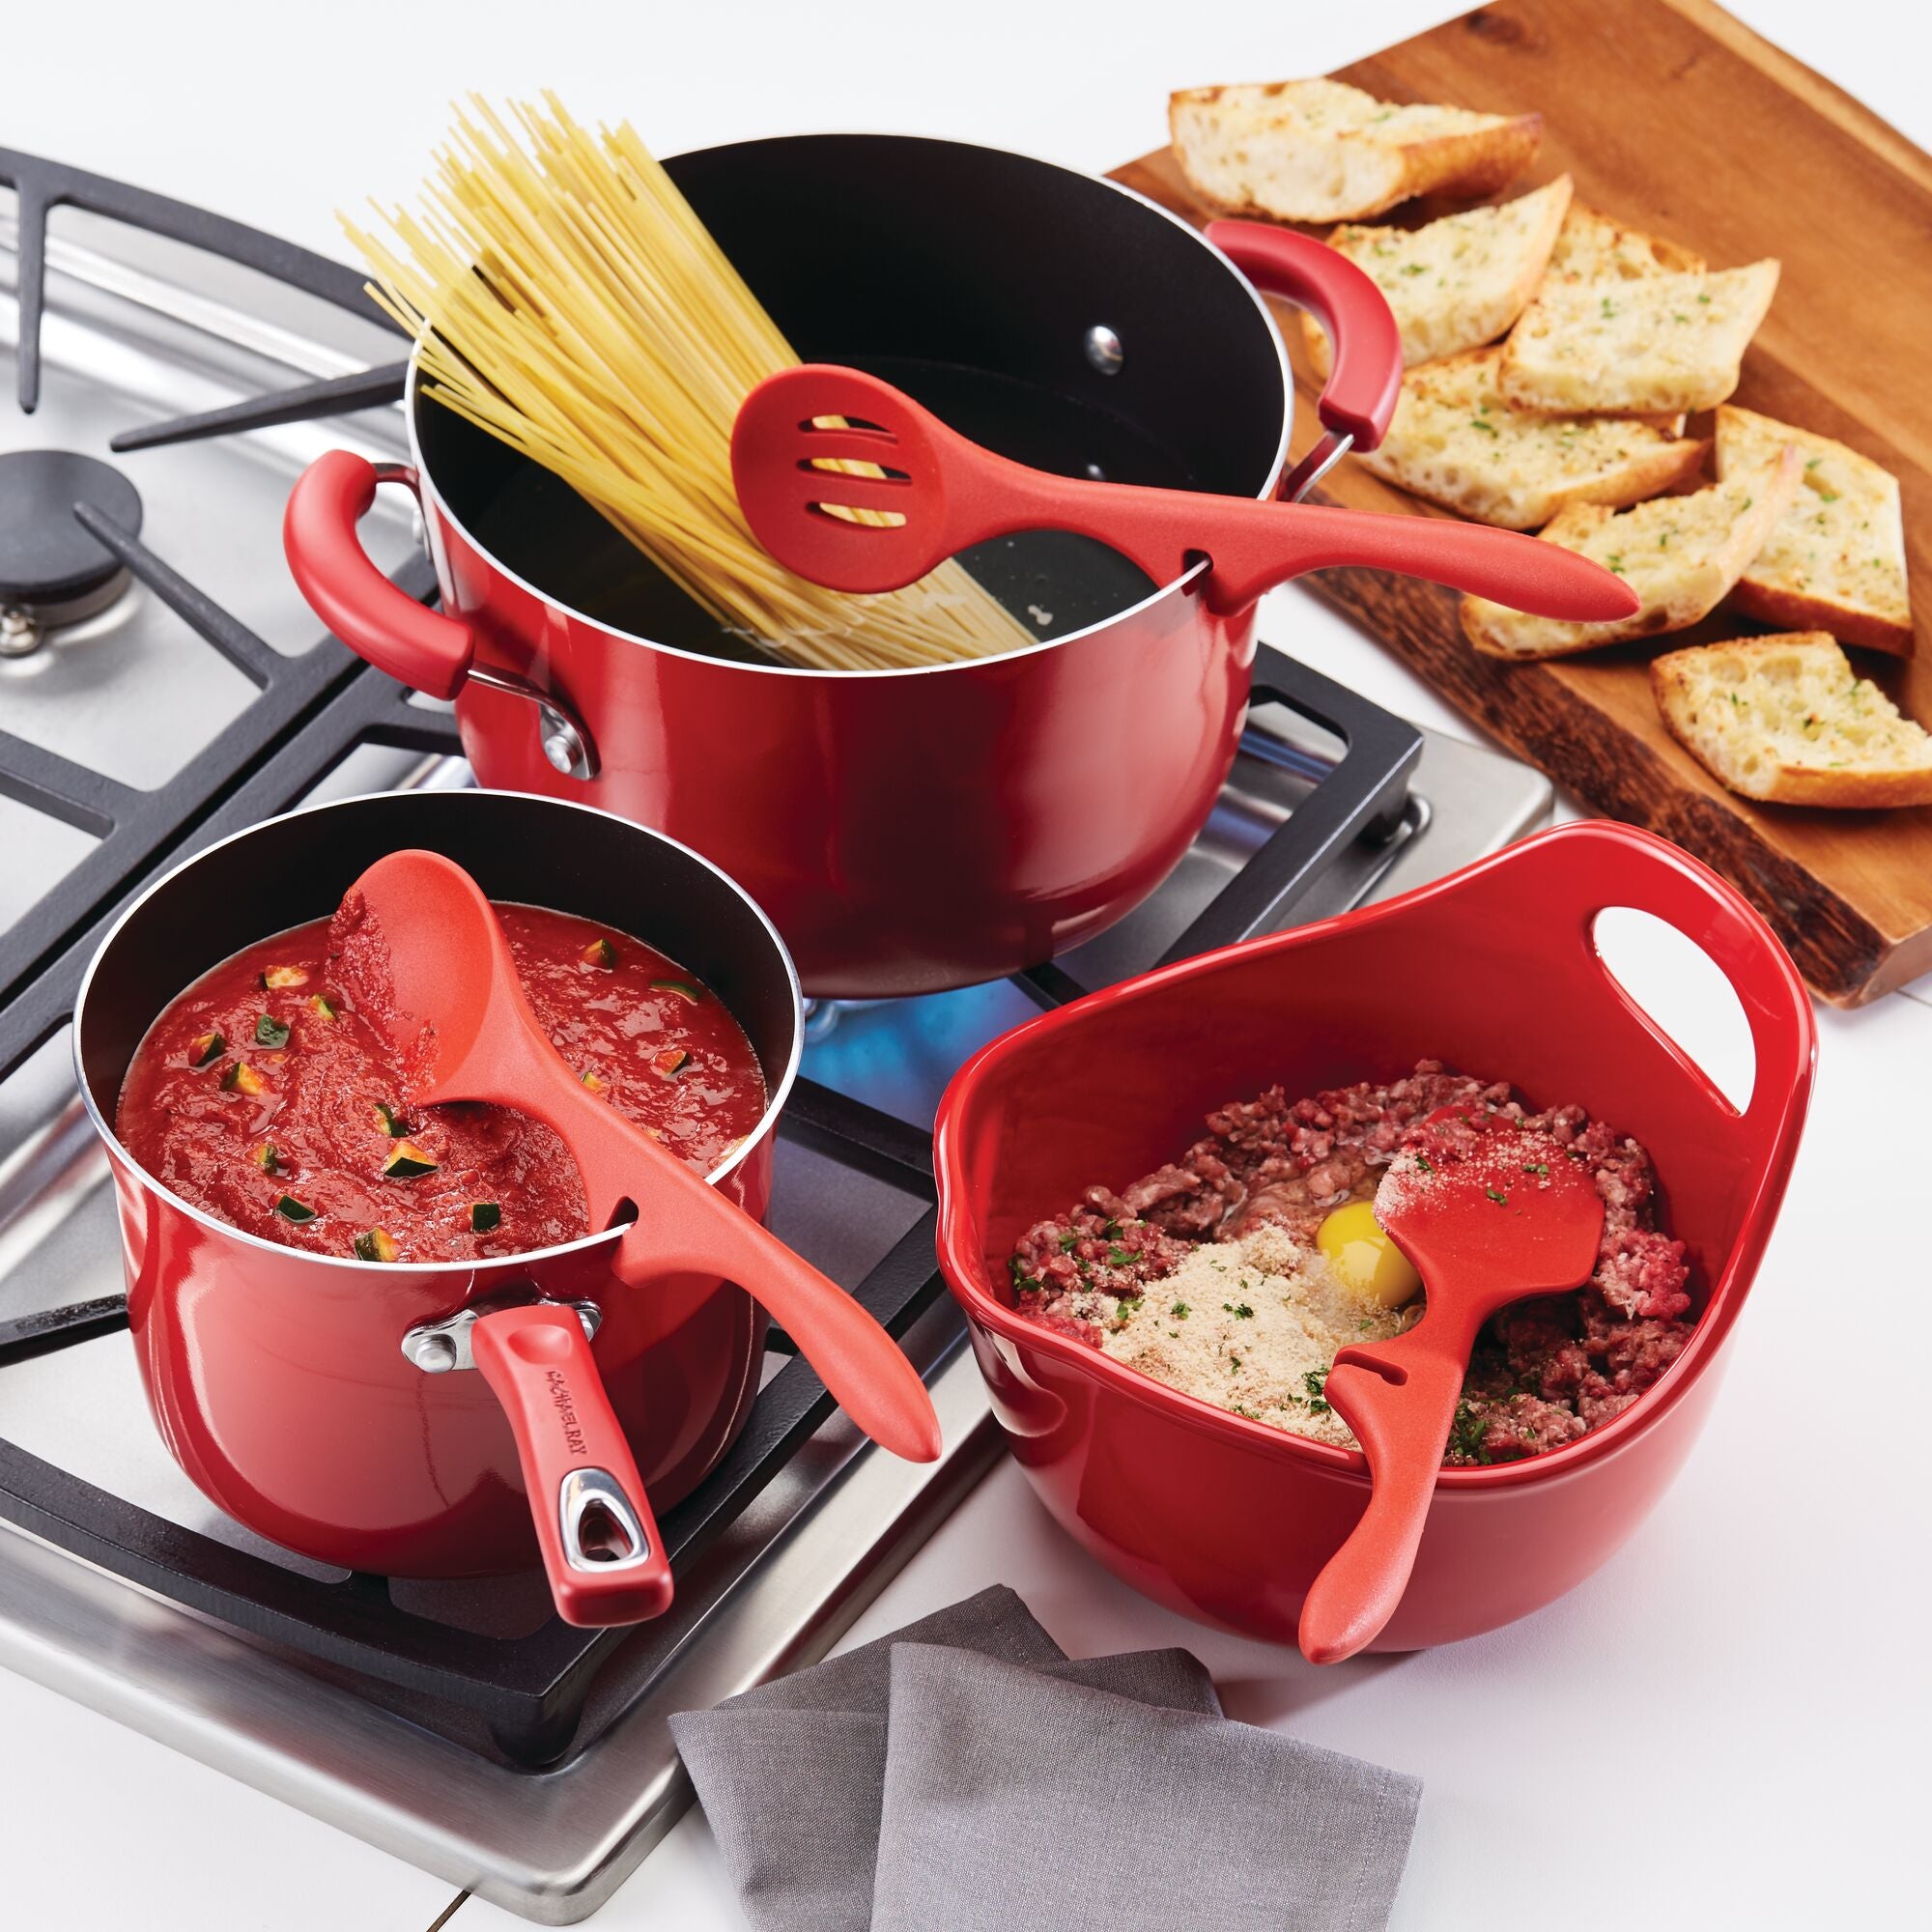 Rachael Ray 6-Piece Lazy Tools Utensil Set, Red